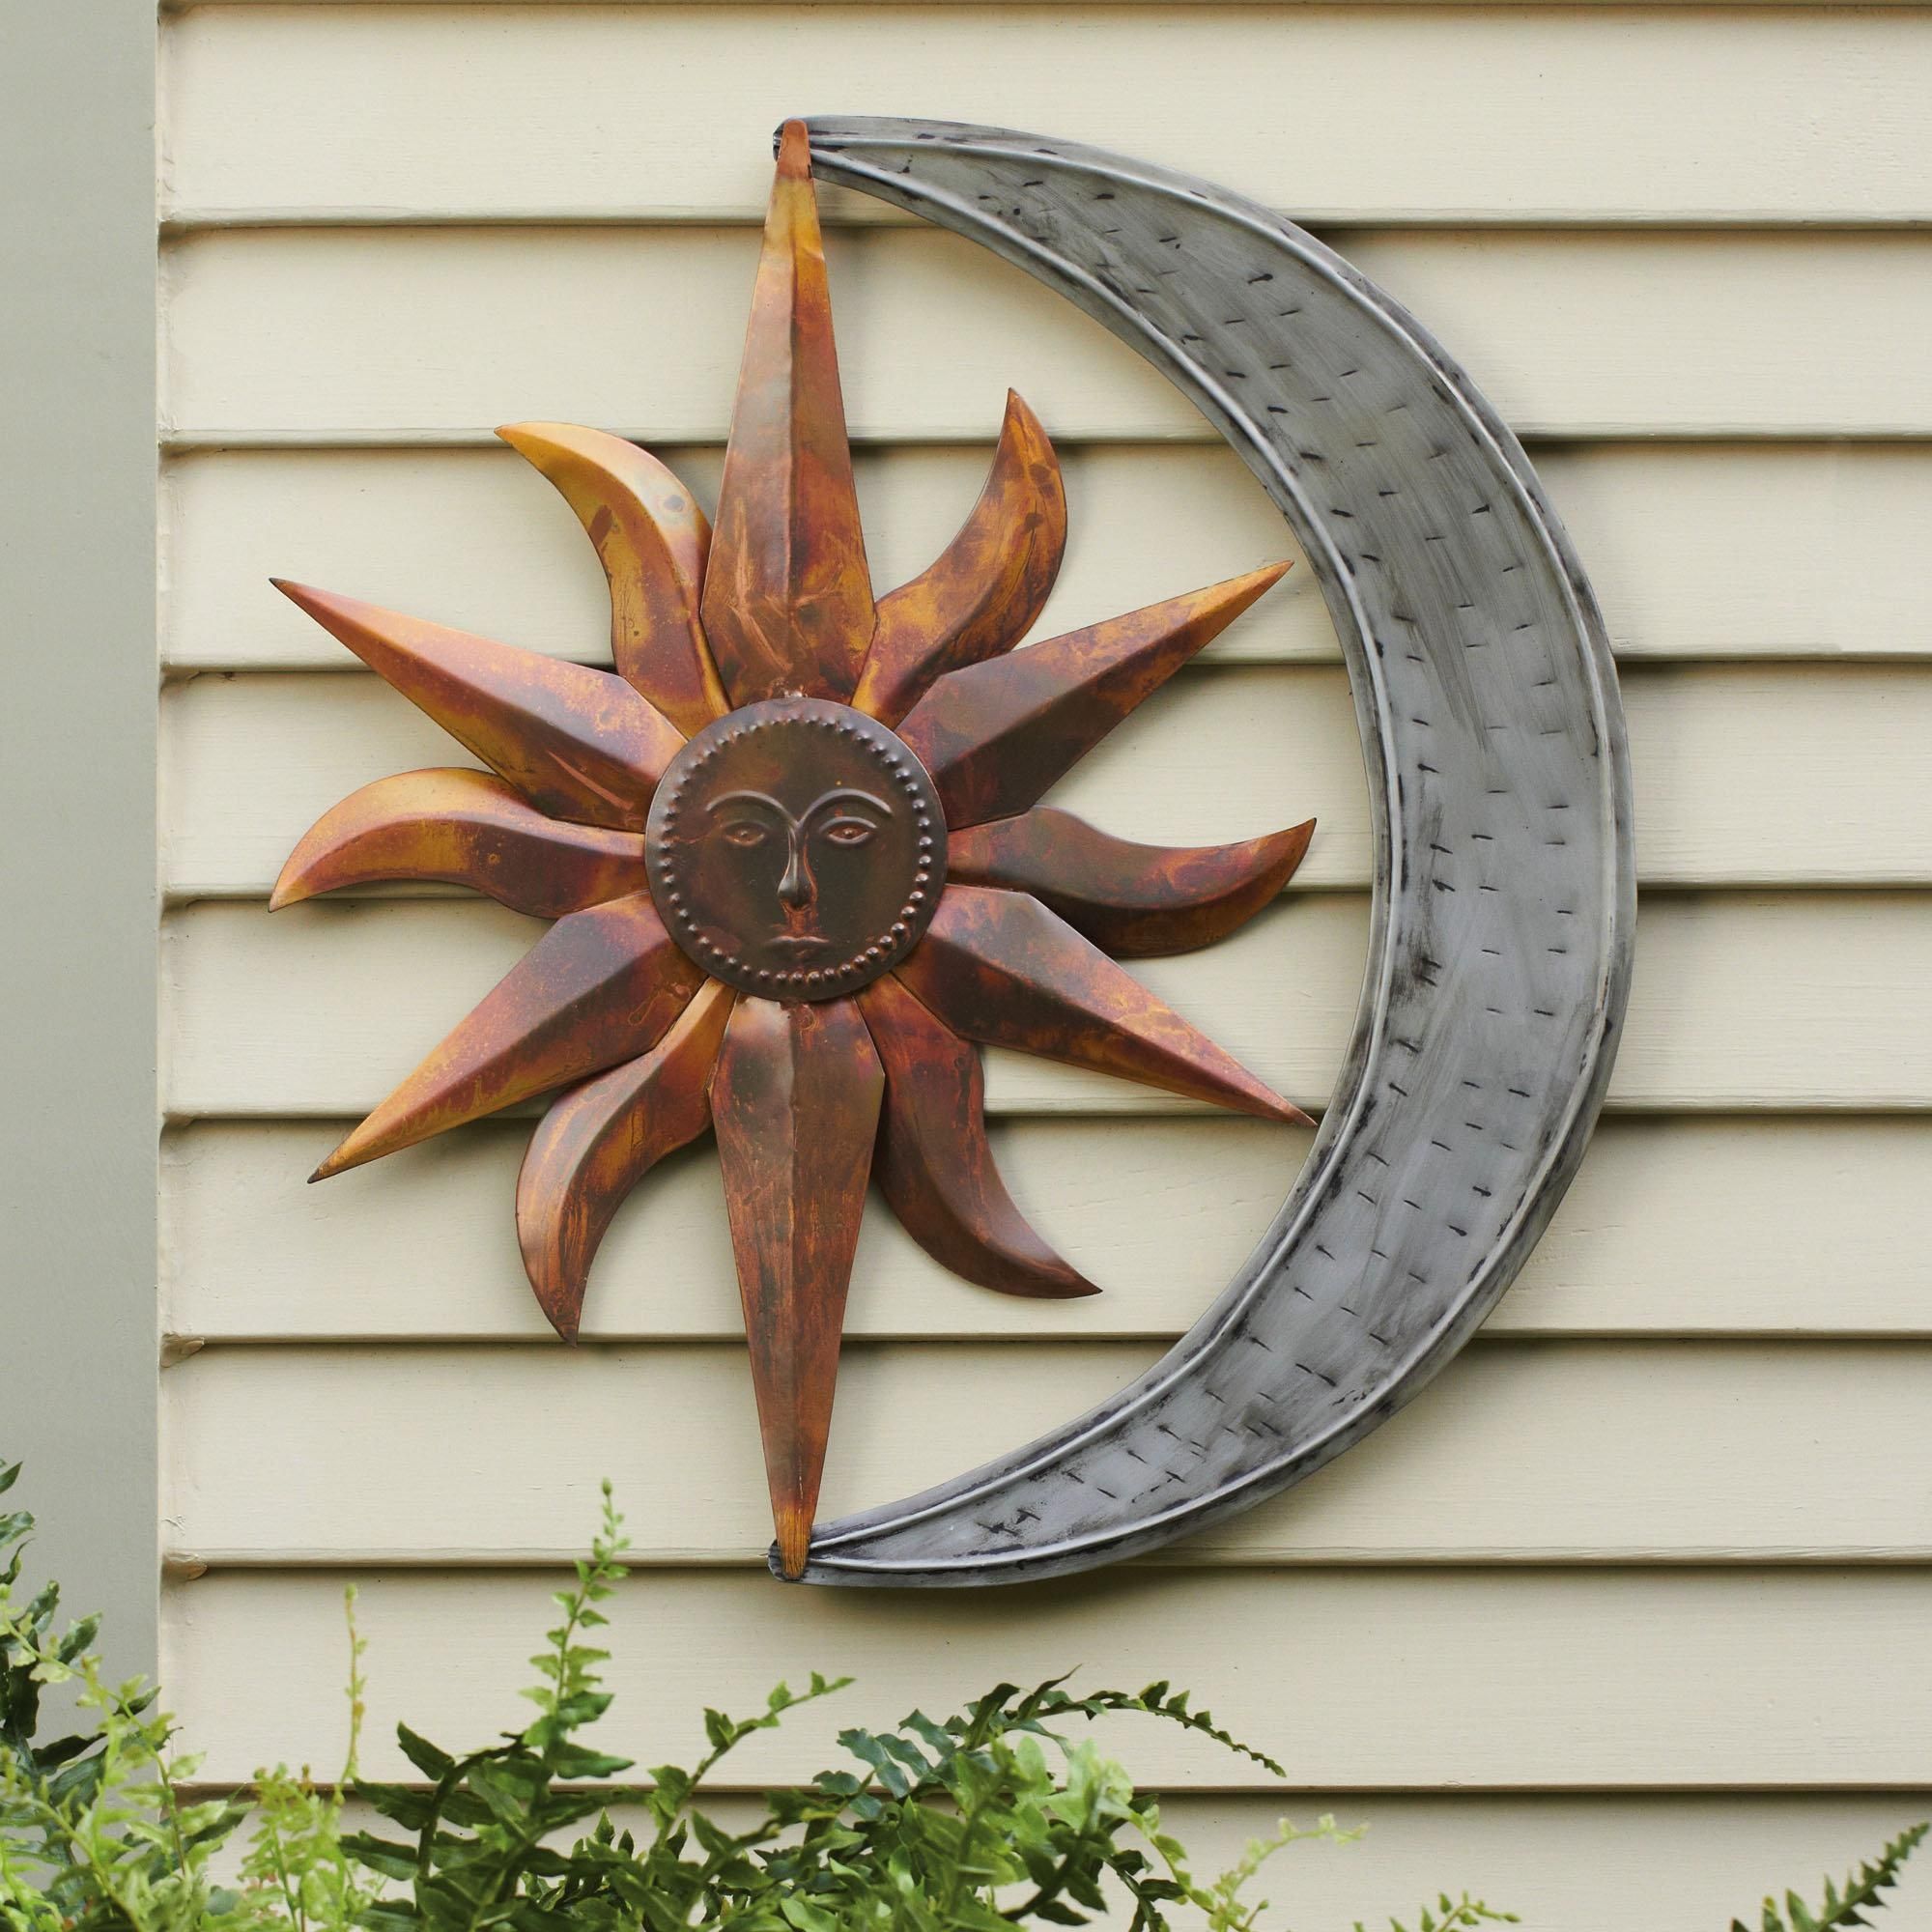 Wall Art Designs: Outdoor Wall Art Decor Wall Plaques And Metal With Regard To Outdoor Wall Sculpture Art (View 4 of 20)